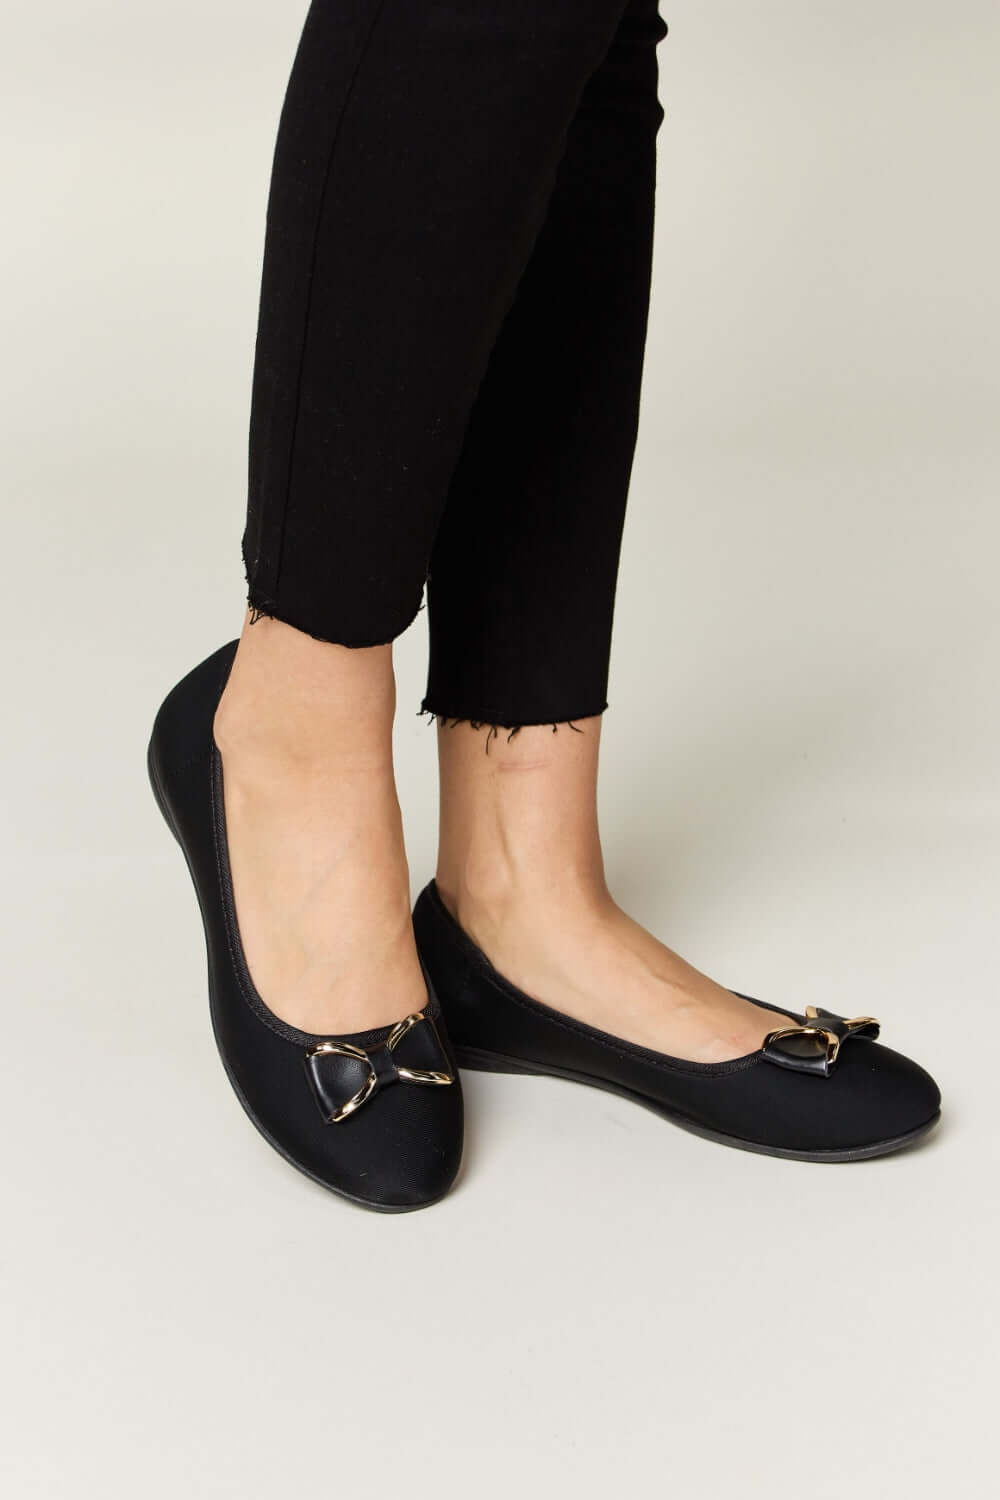 FOREVER LINK Metal Buckle Flat Loafers at Bella Road